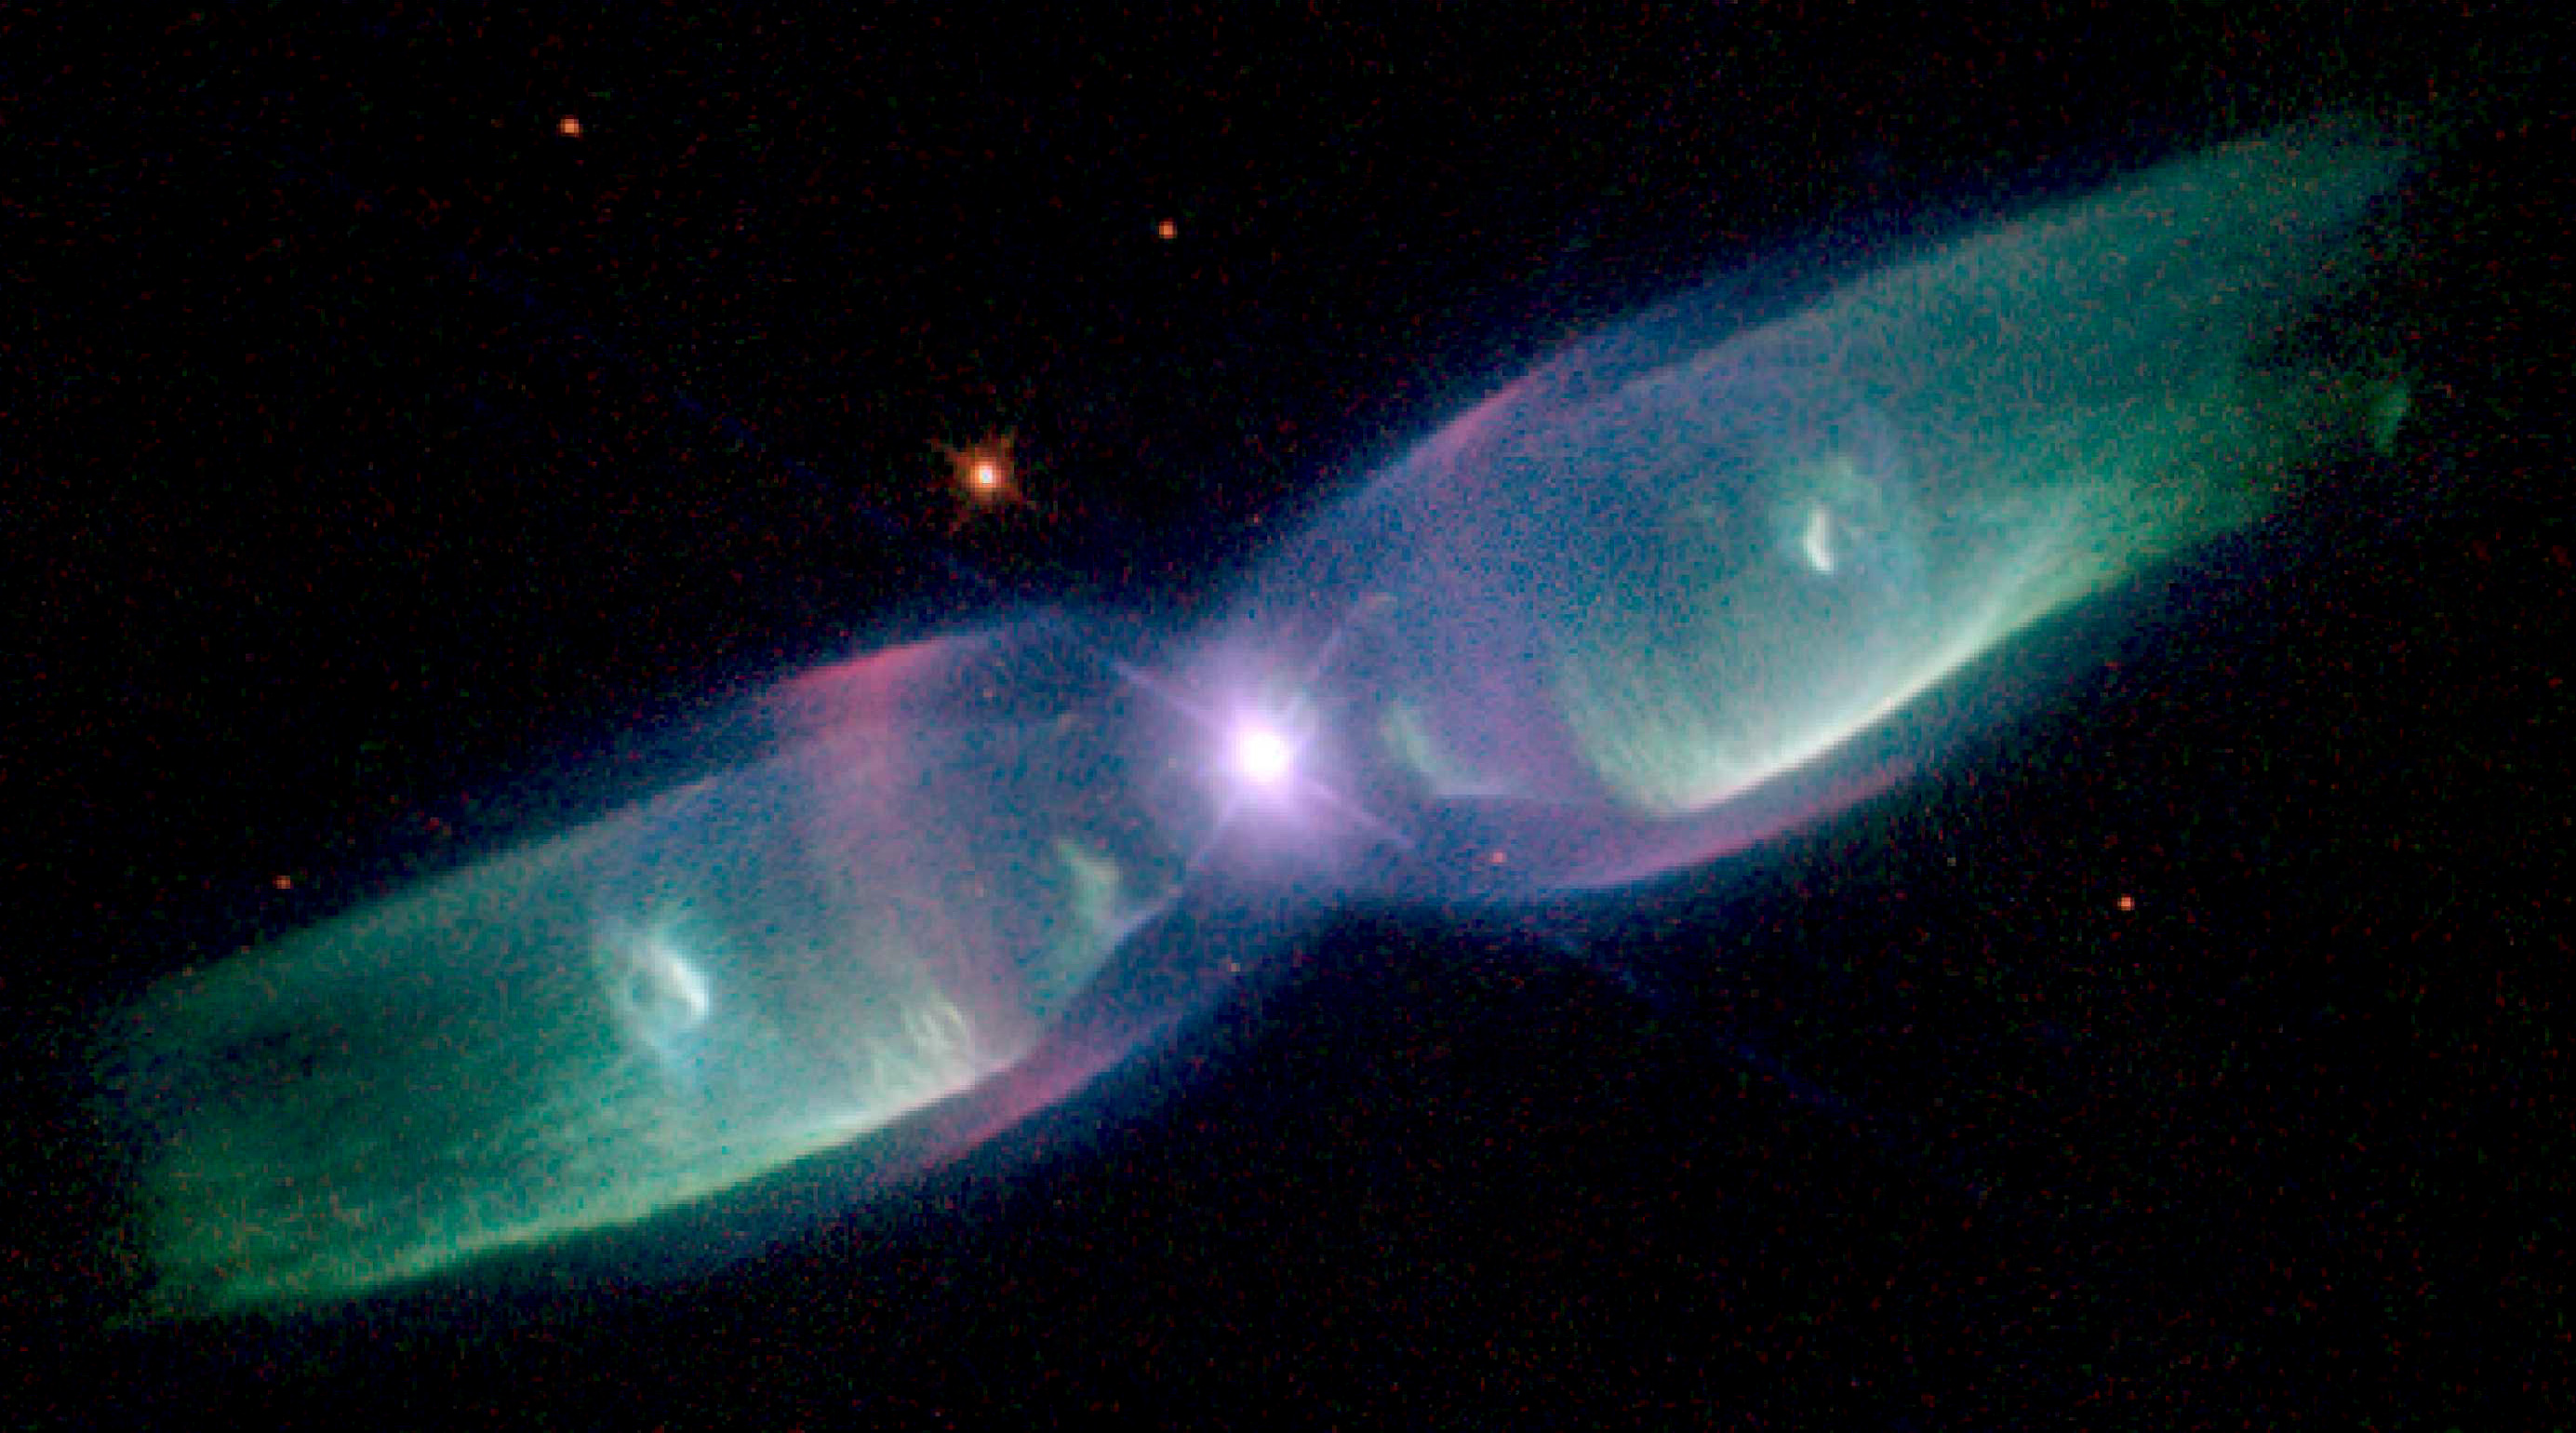 Planetary_Nebula_M2_9__otherwise_known_as_the_Twin_Jet_Nebula_or_the_Wings_of_a_Butterfly_Nebula__is_a_good_example_of_a_bipolar_or_two_lobed_nebula.jpg